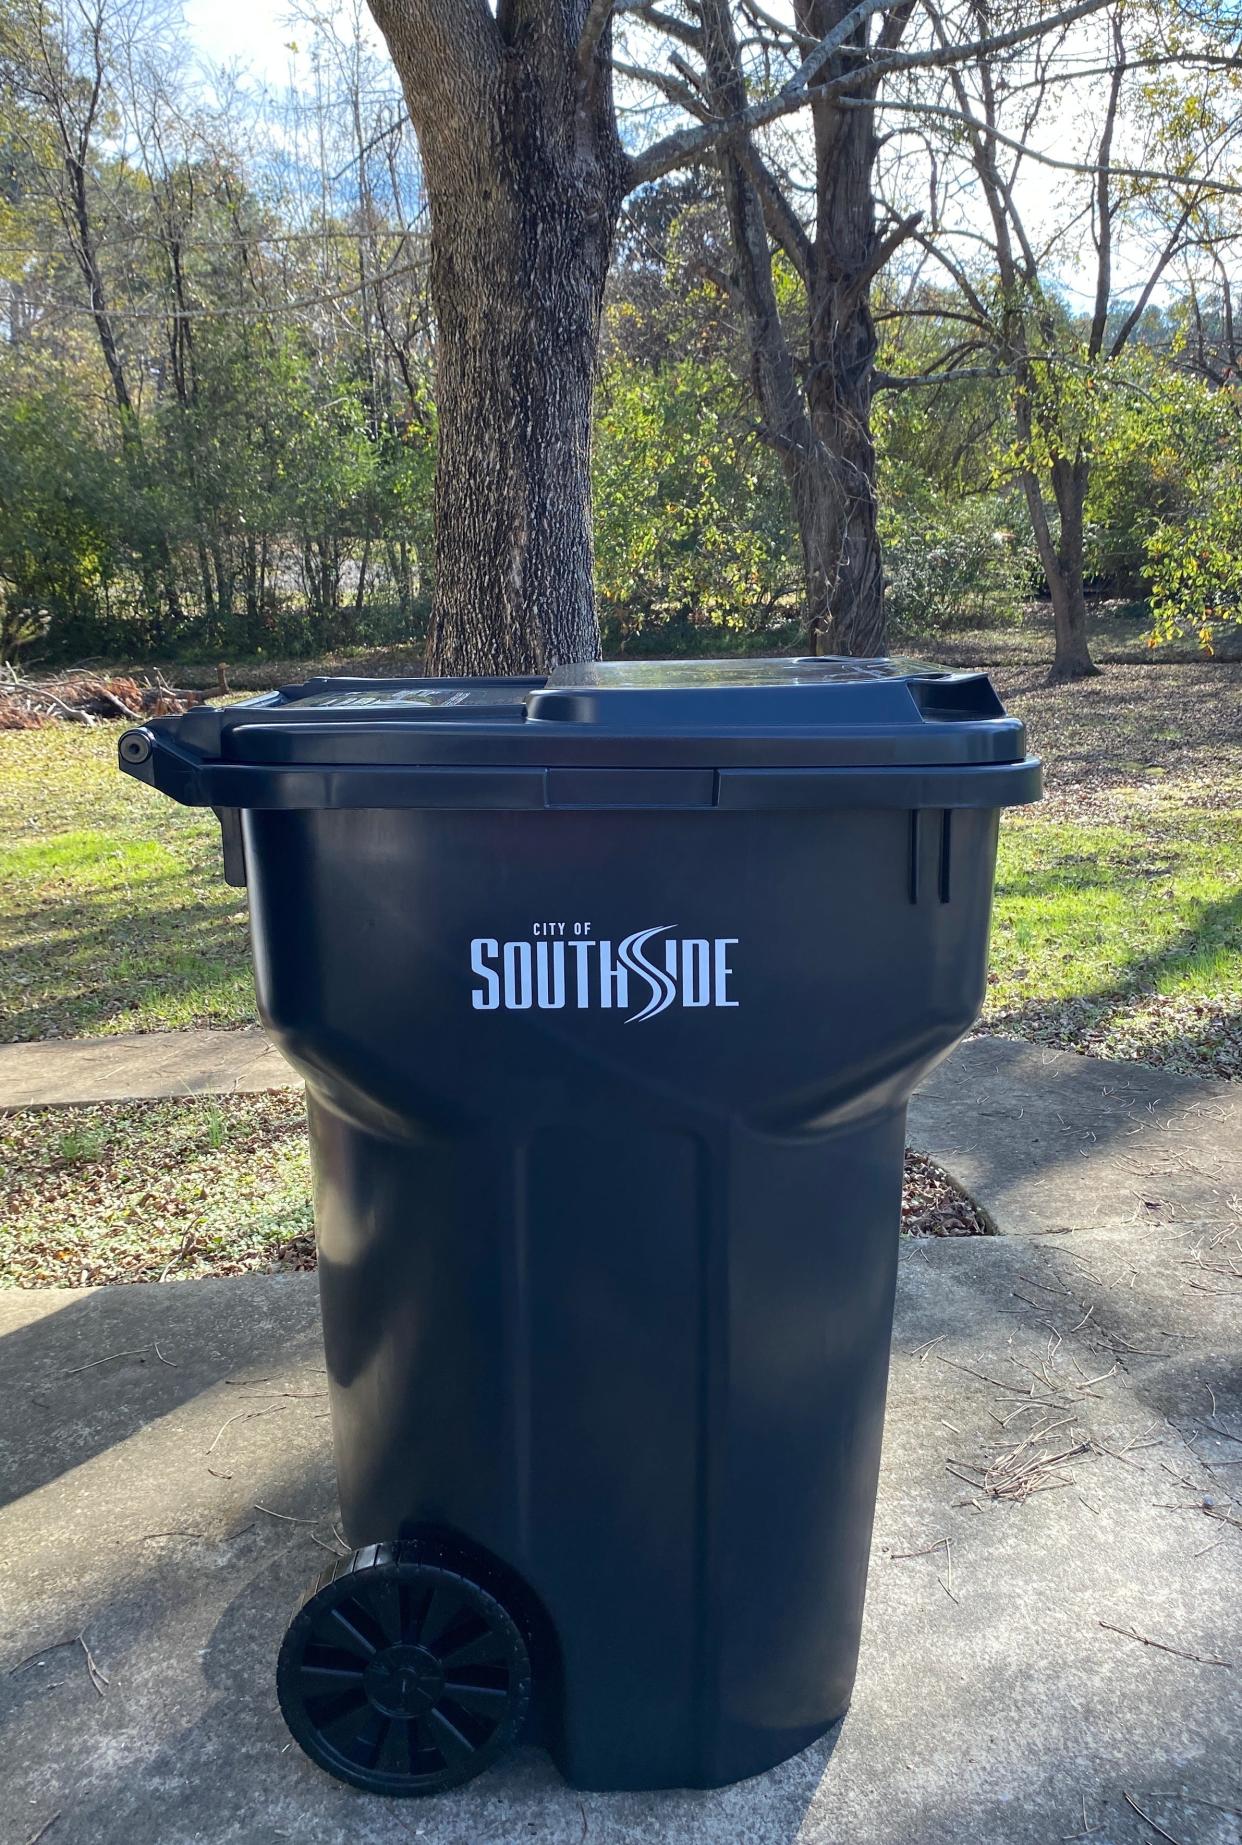 The City of Southside has delivered new garbage cans to residents for use starting Jan. 2, when the city will take over garbage pickup service.